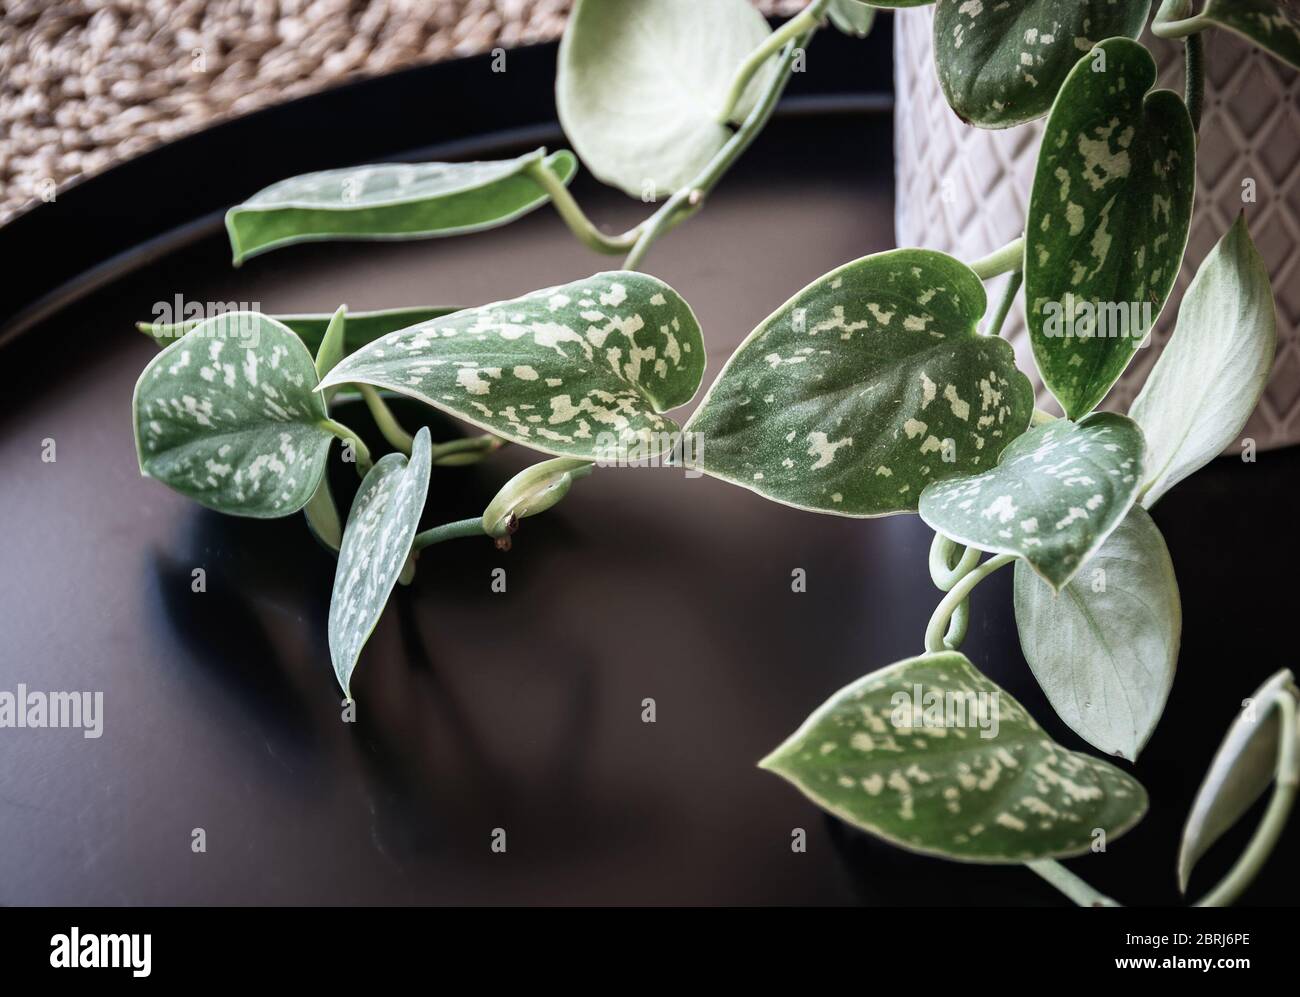 Close-up on trailing vine of satin pothos (scindapsus pictus) houseplant in a decorative white pot on a dark tray. Exotic trendy houseplant detail. Stock Photo